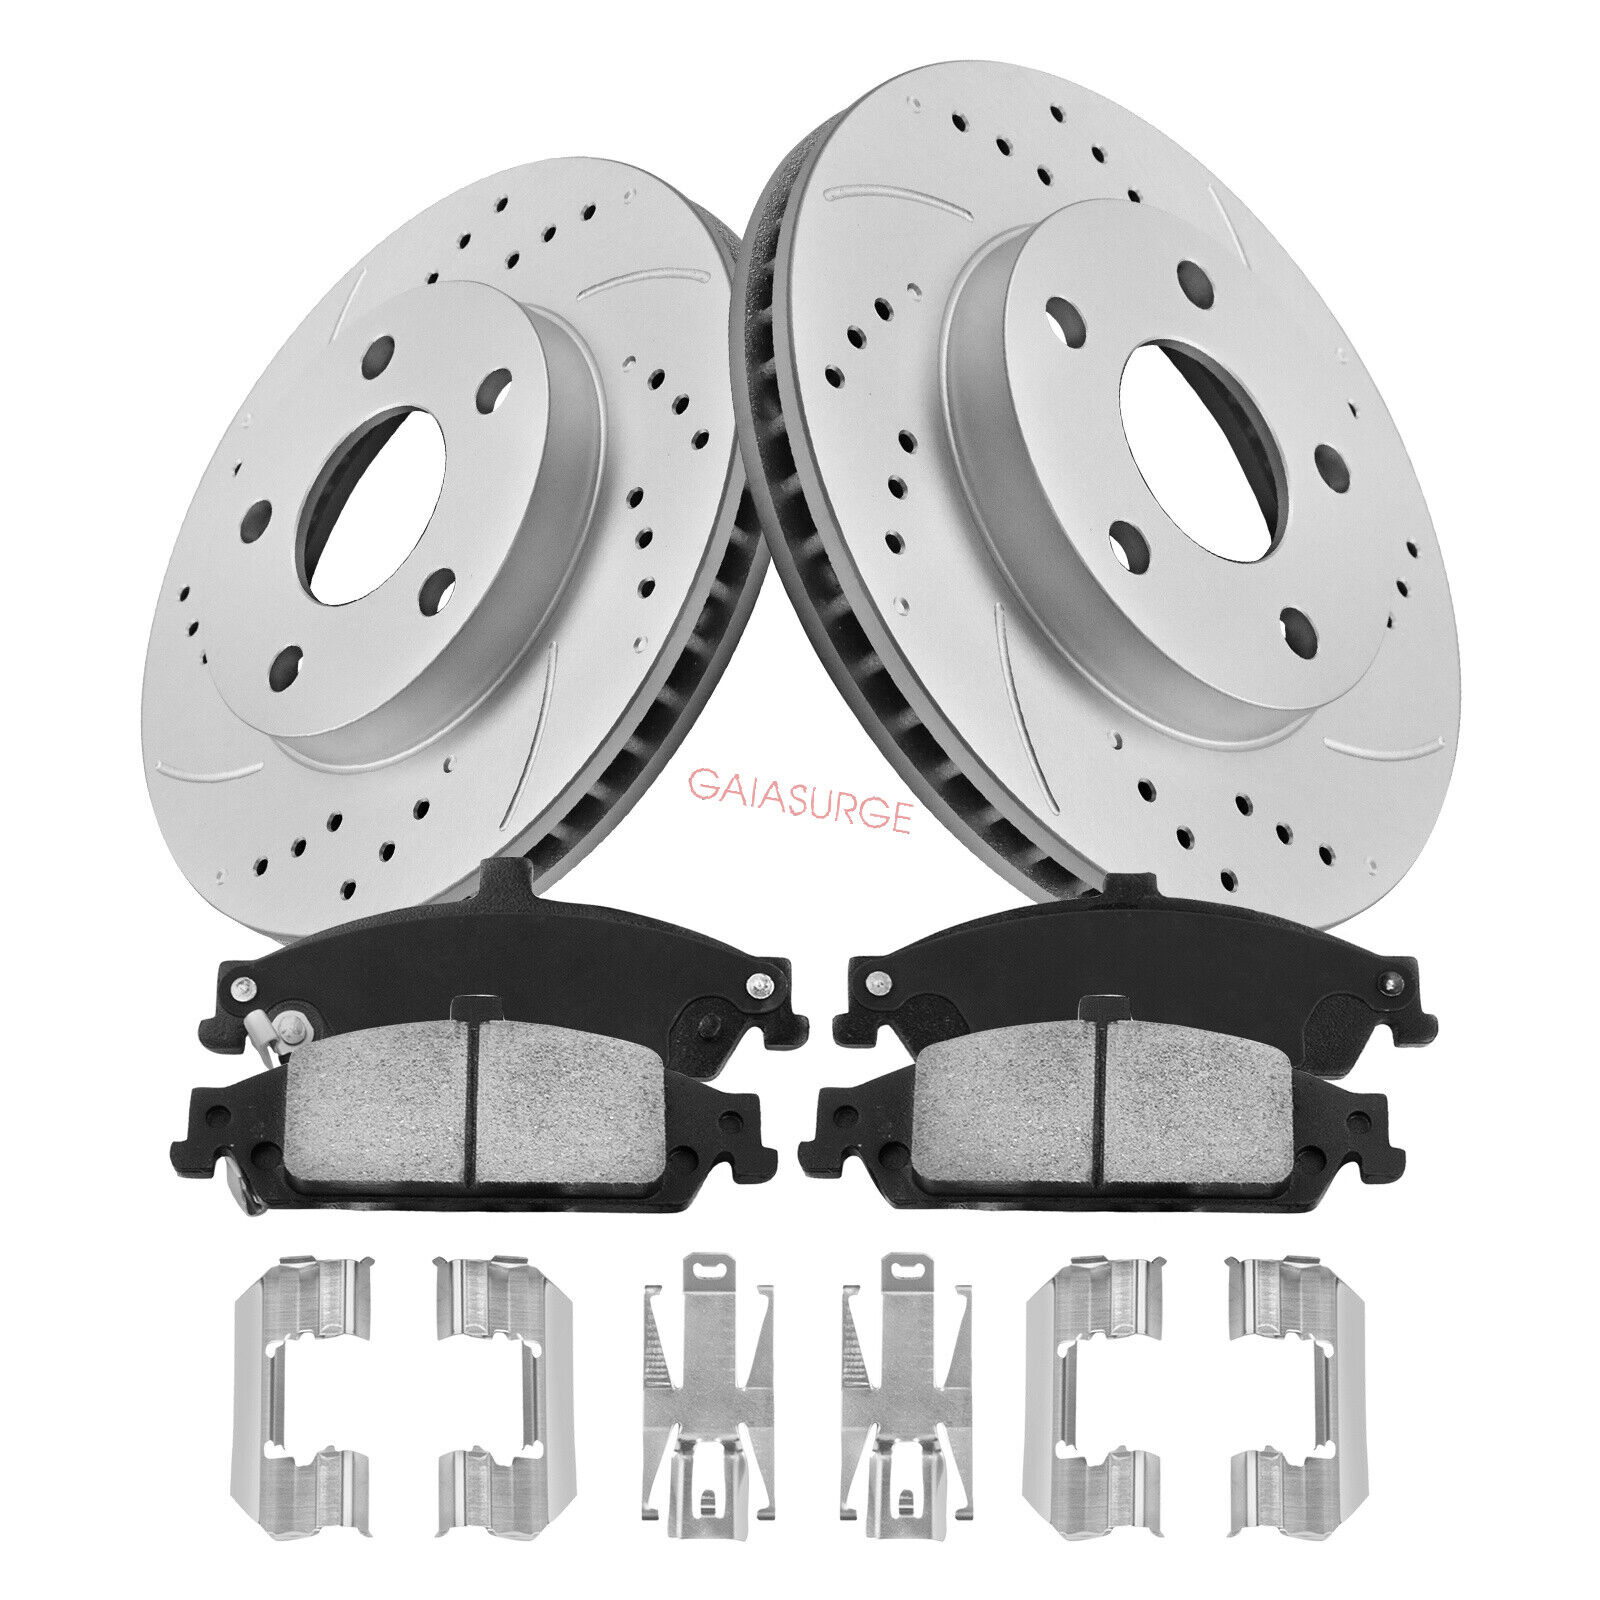 Front Drilled Brake Rotors + Ceramic Pads for Chevy Malibu Grand Am Olds Alero